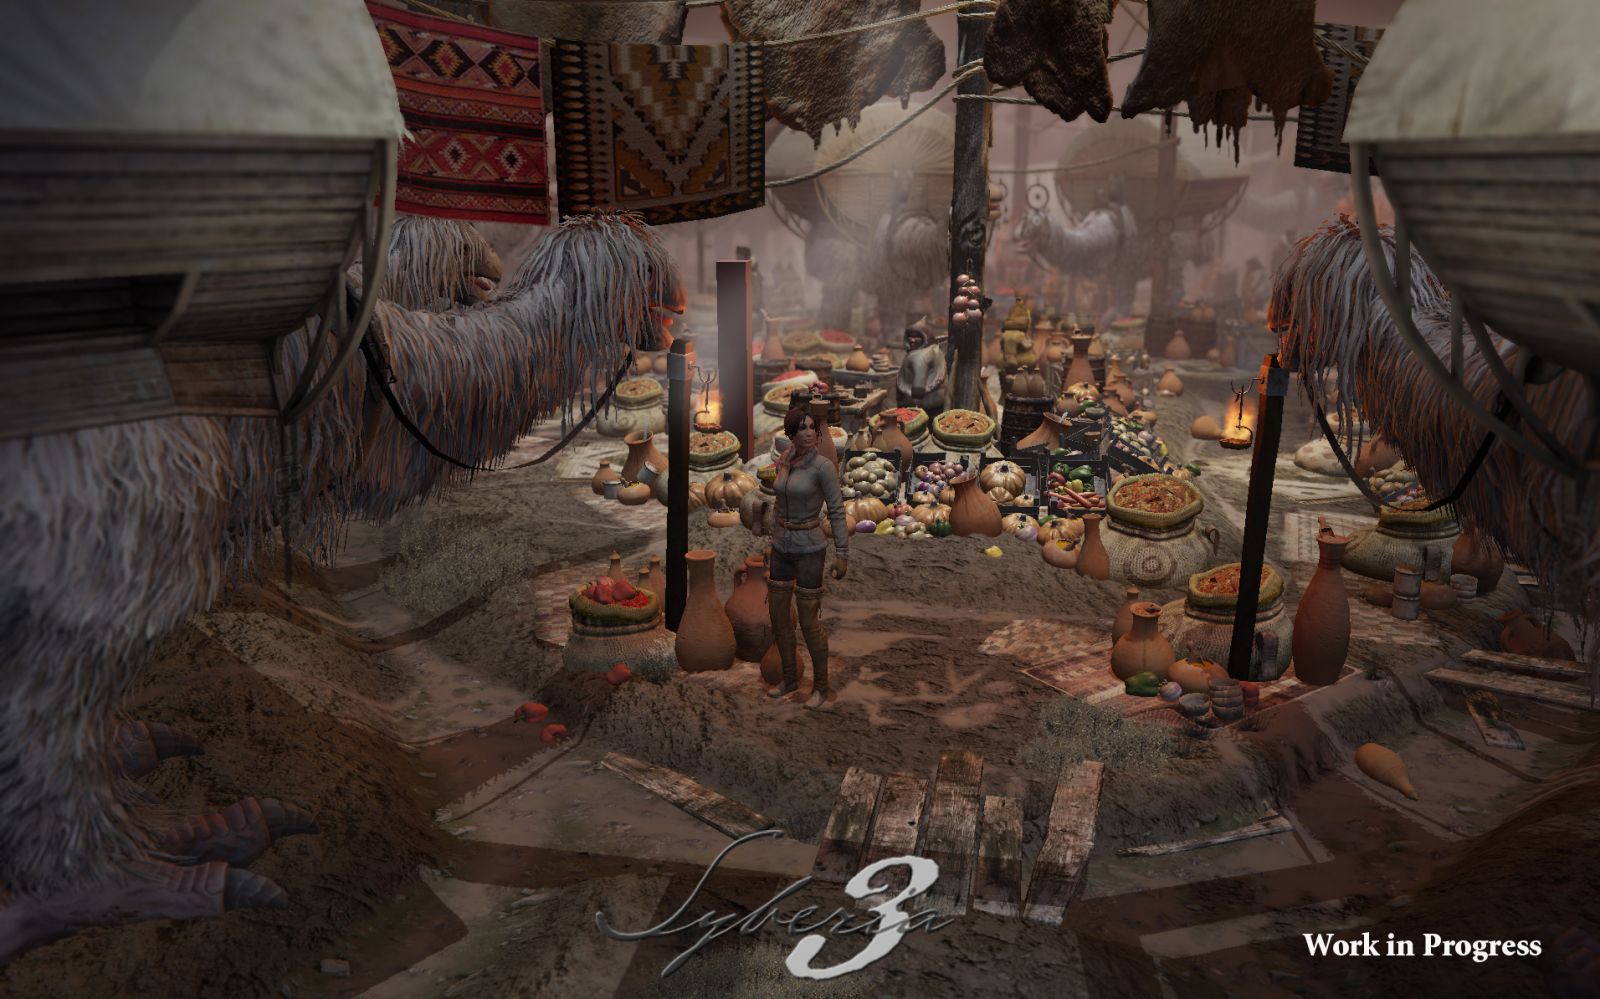 Amazing Syberia 3 Pictures & Backgrounds